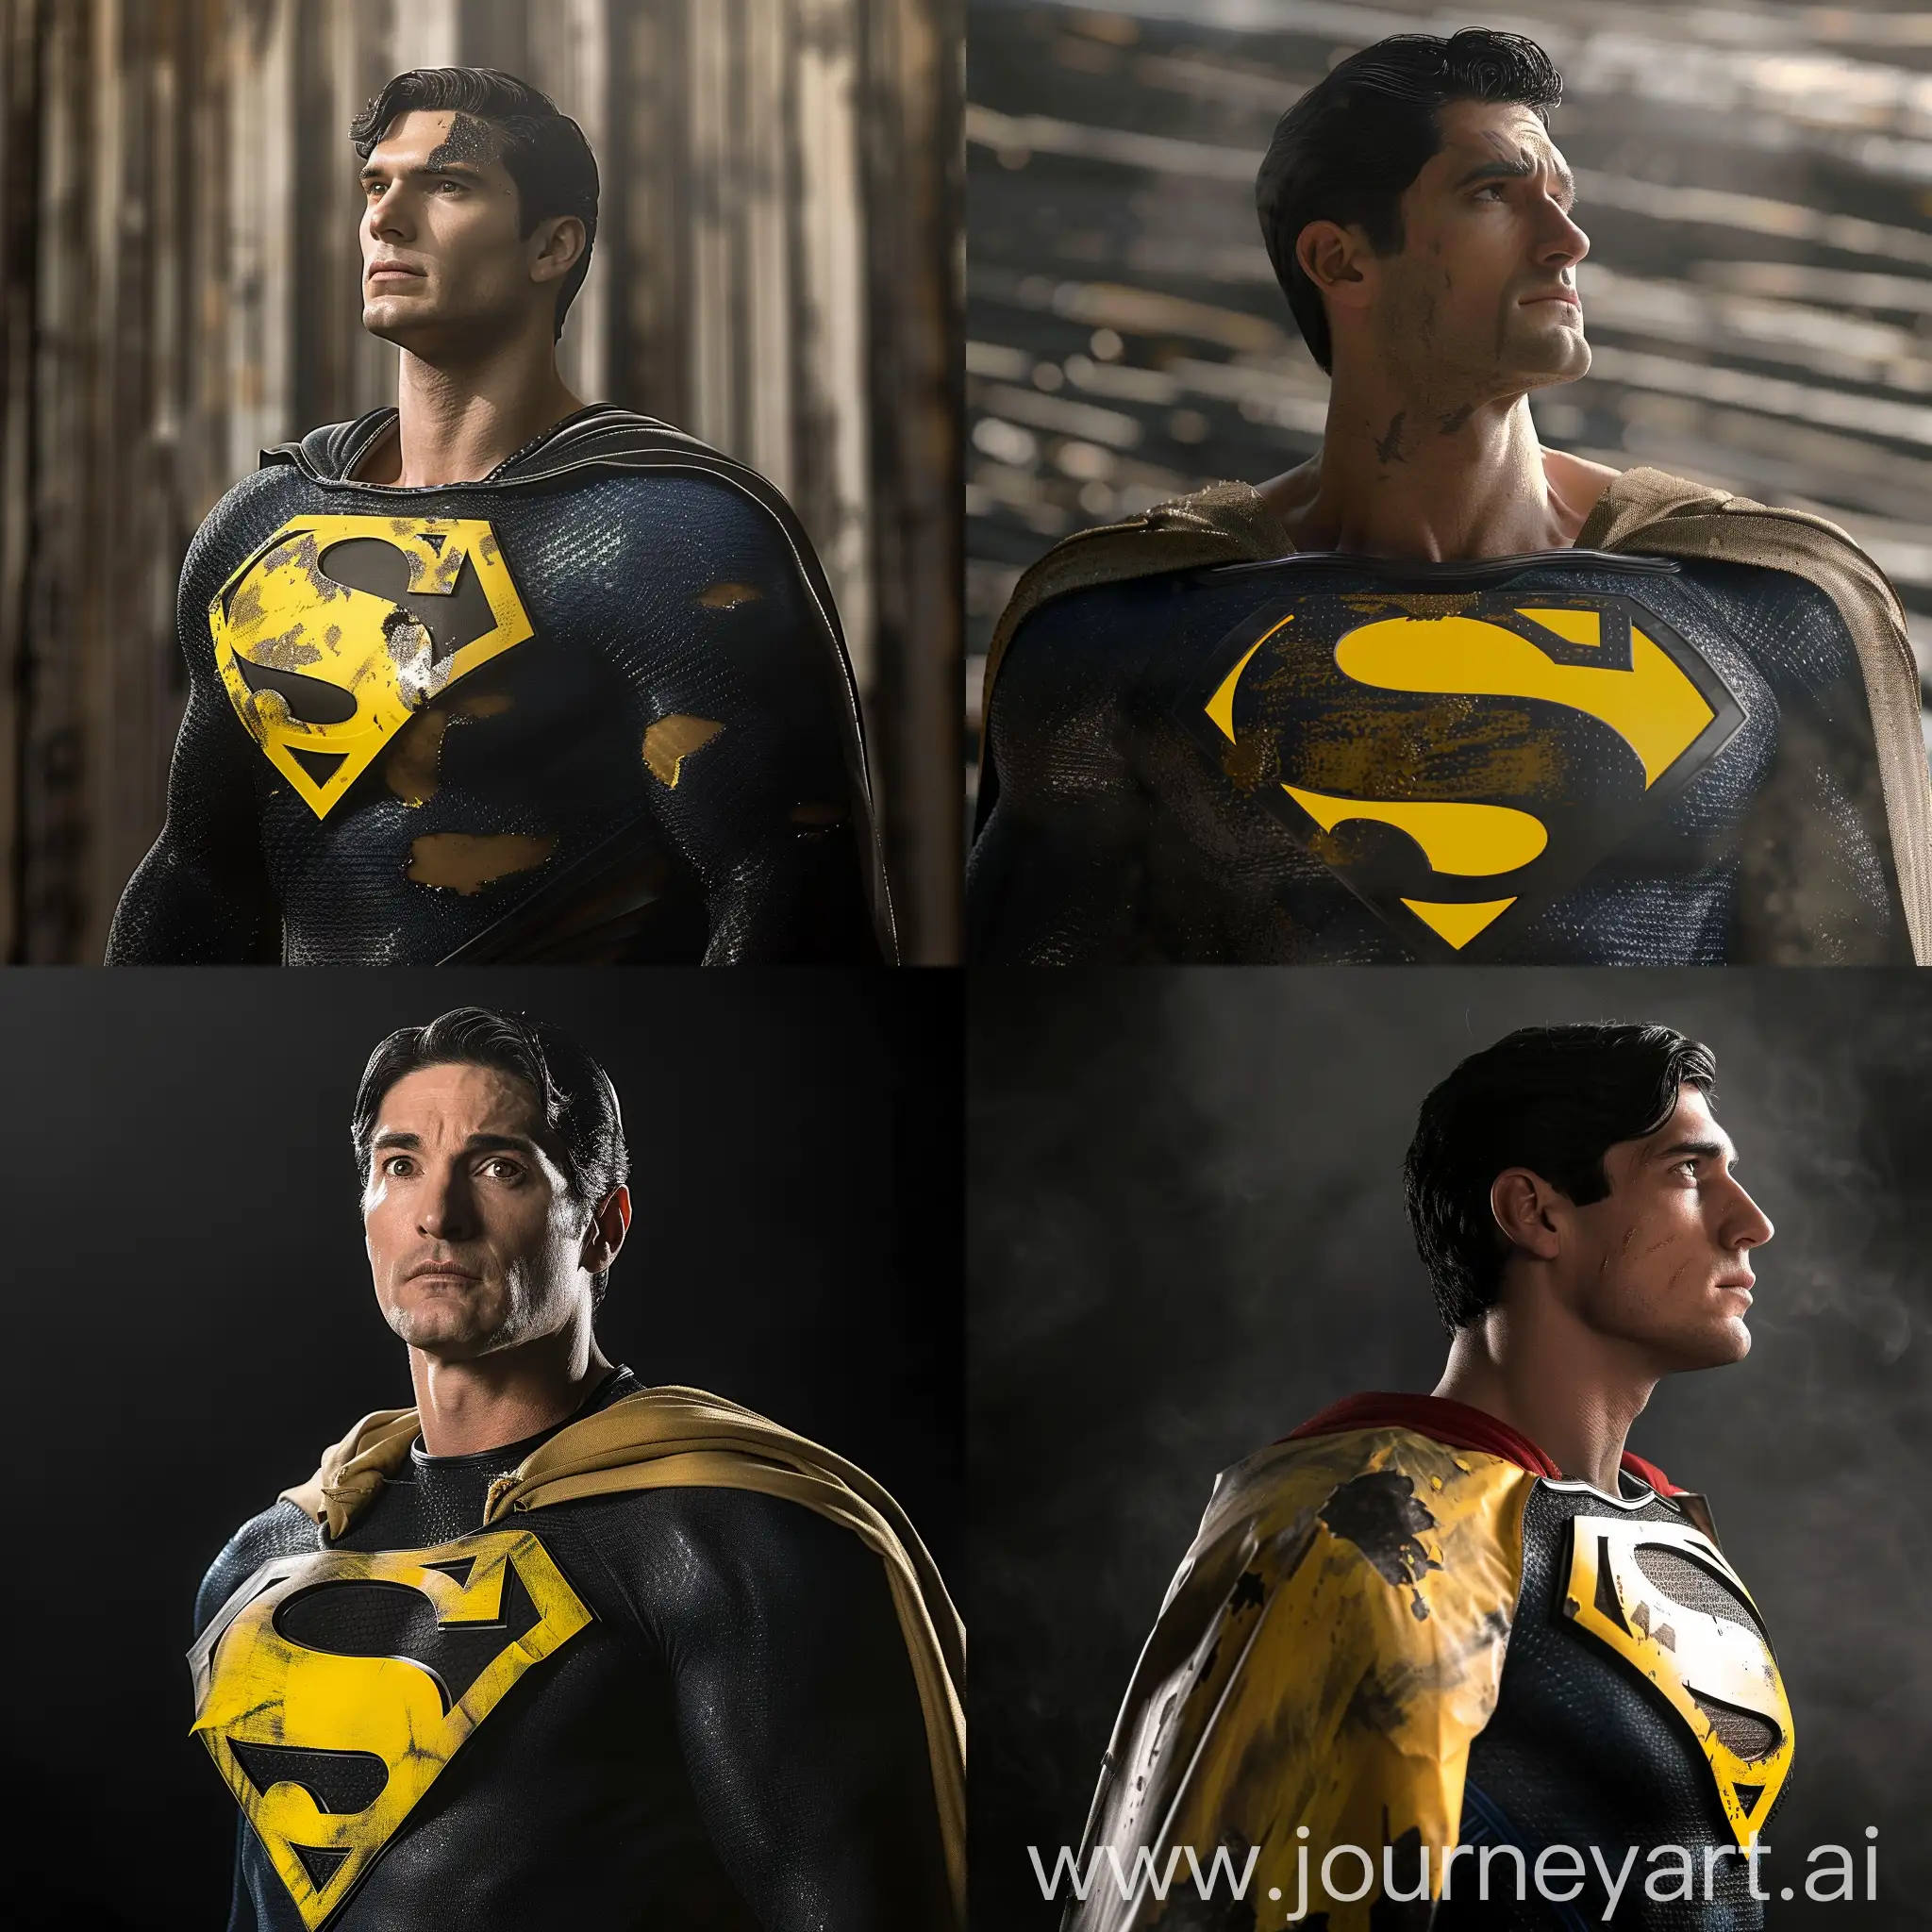 David-Corenswet-Portrays-Superman-in-Kingdom-Come-Suit-with-Unique-Yellow-Logo-Variation